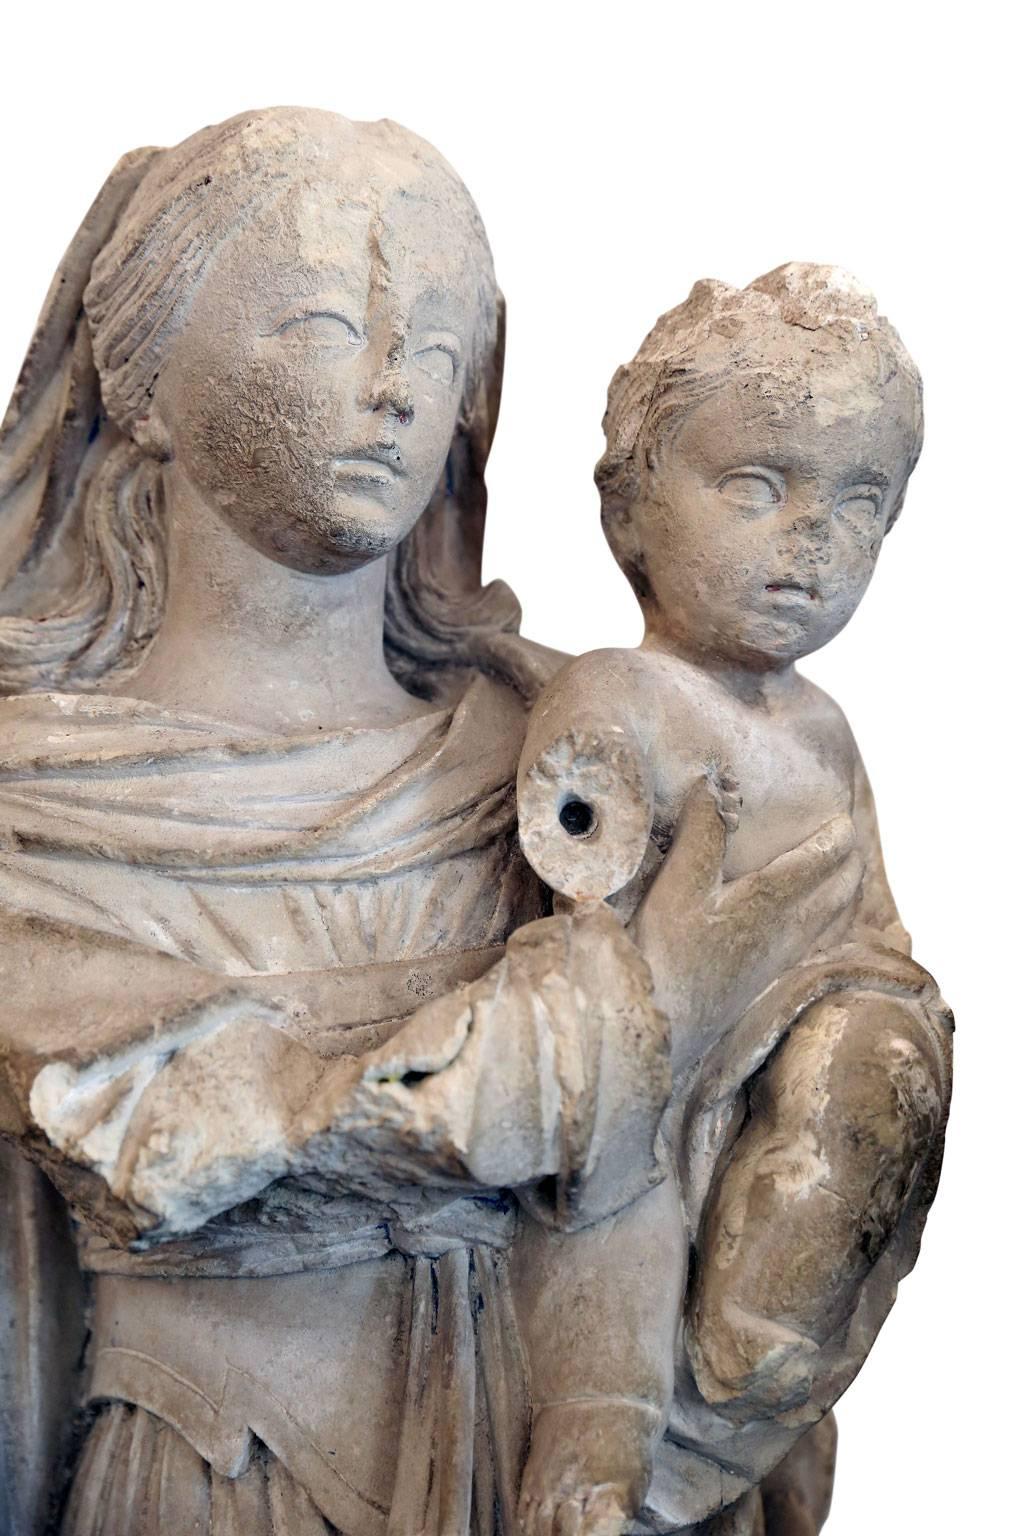 Large French limestone statue of mother and child (circa 1615-1635) from Ardeche in the Auvergne-Rhône-Alpes region of south-central France.